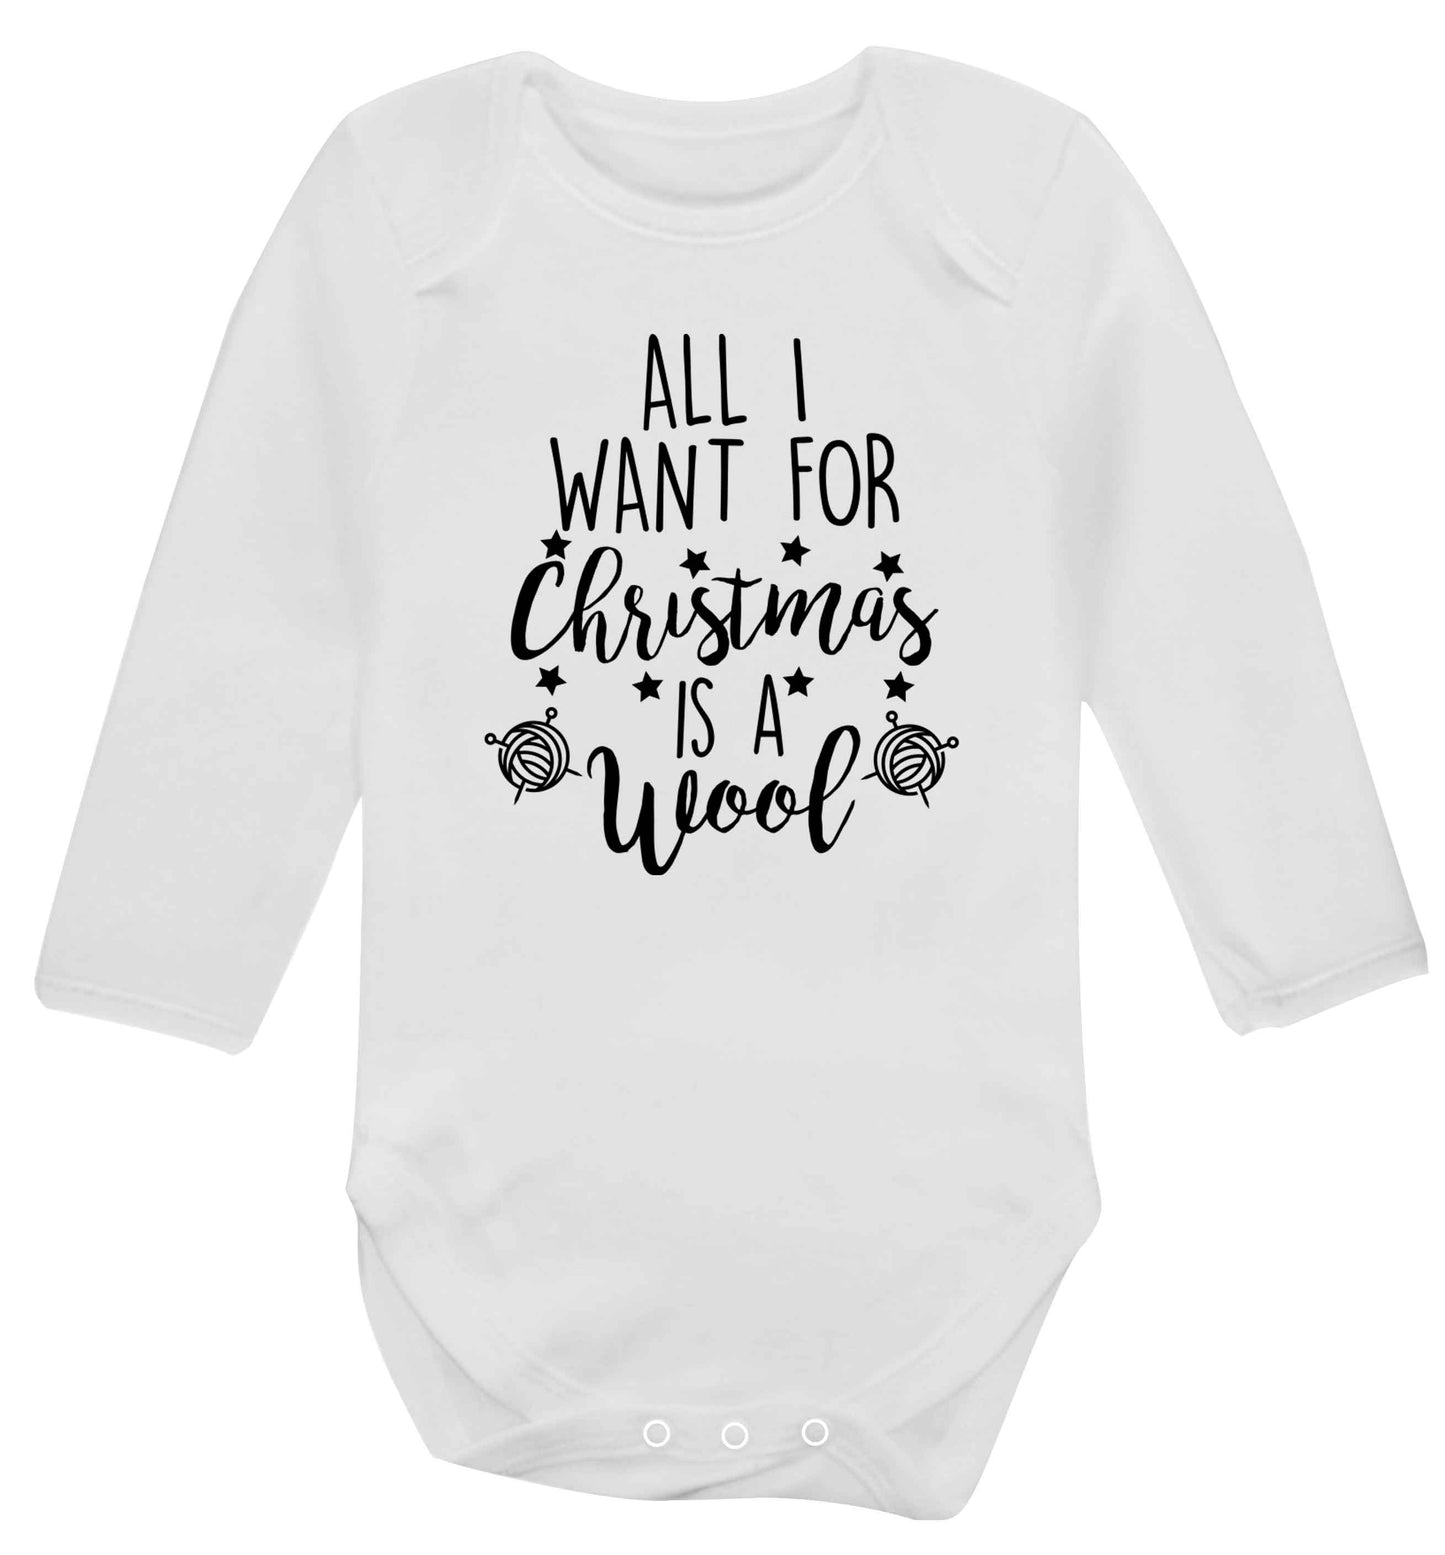 All I want for Christmas is wool! Baby Vest long sleeved white 6-12 months